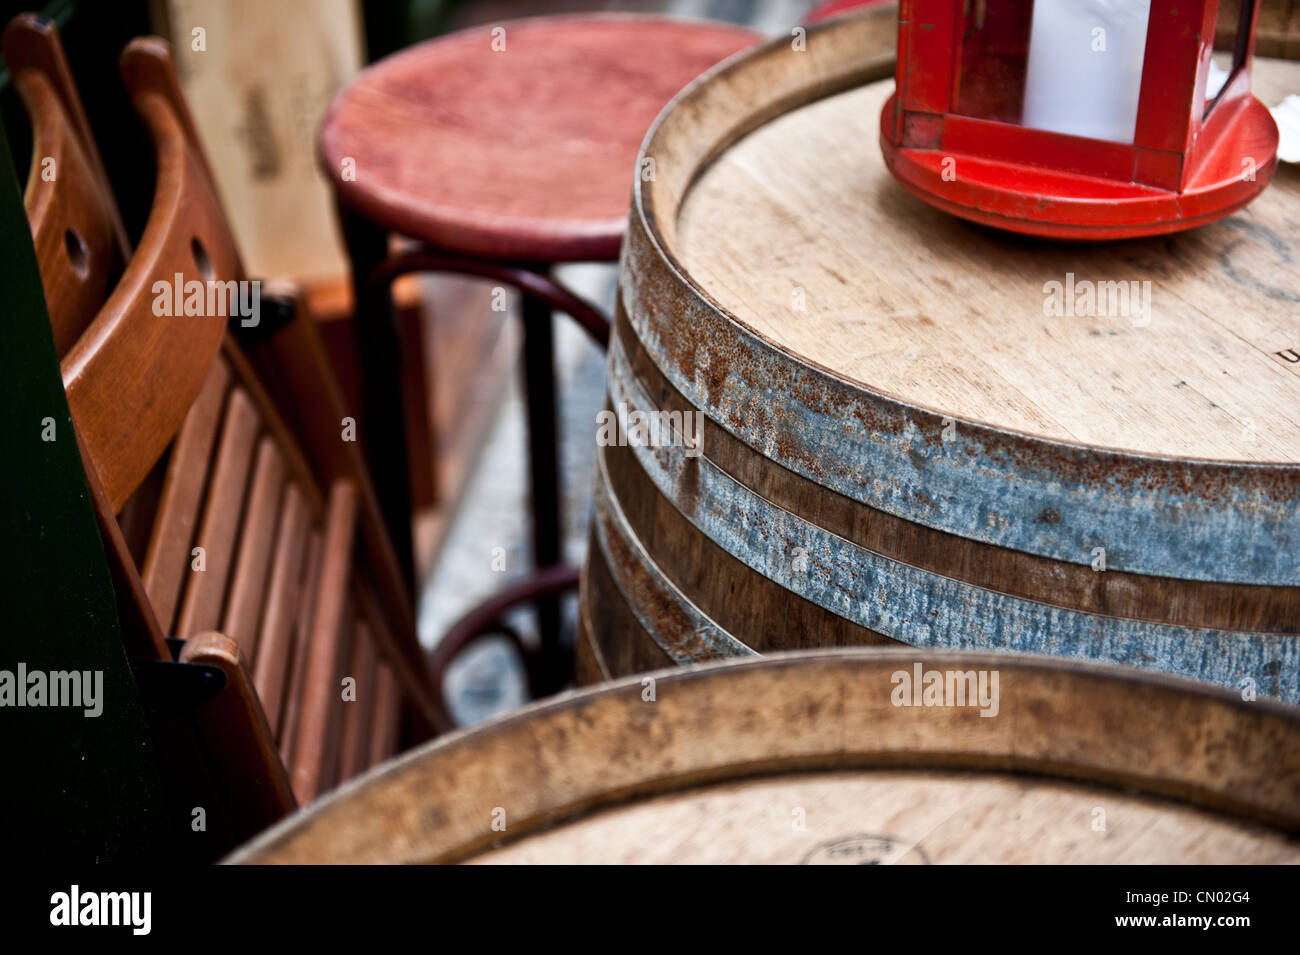 A red object on top of a wooden beer barrel outside of a restaurant. Stock Photo